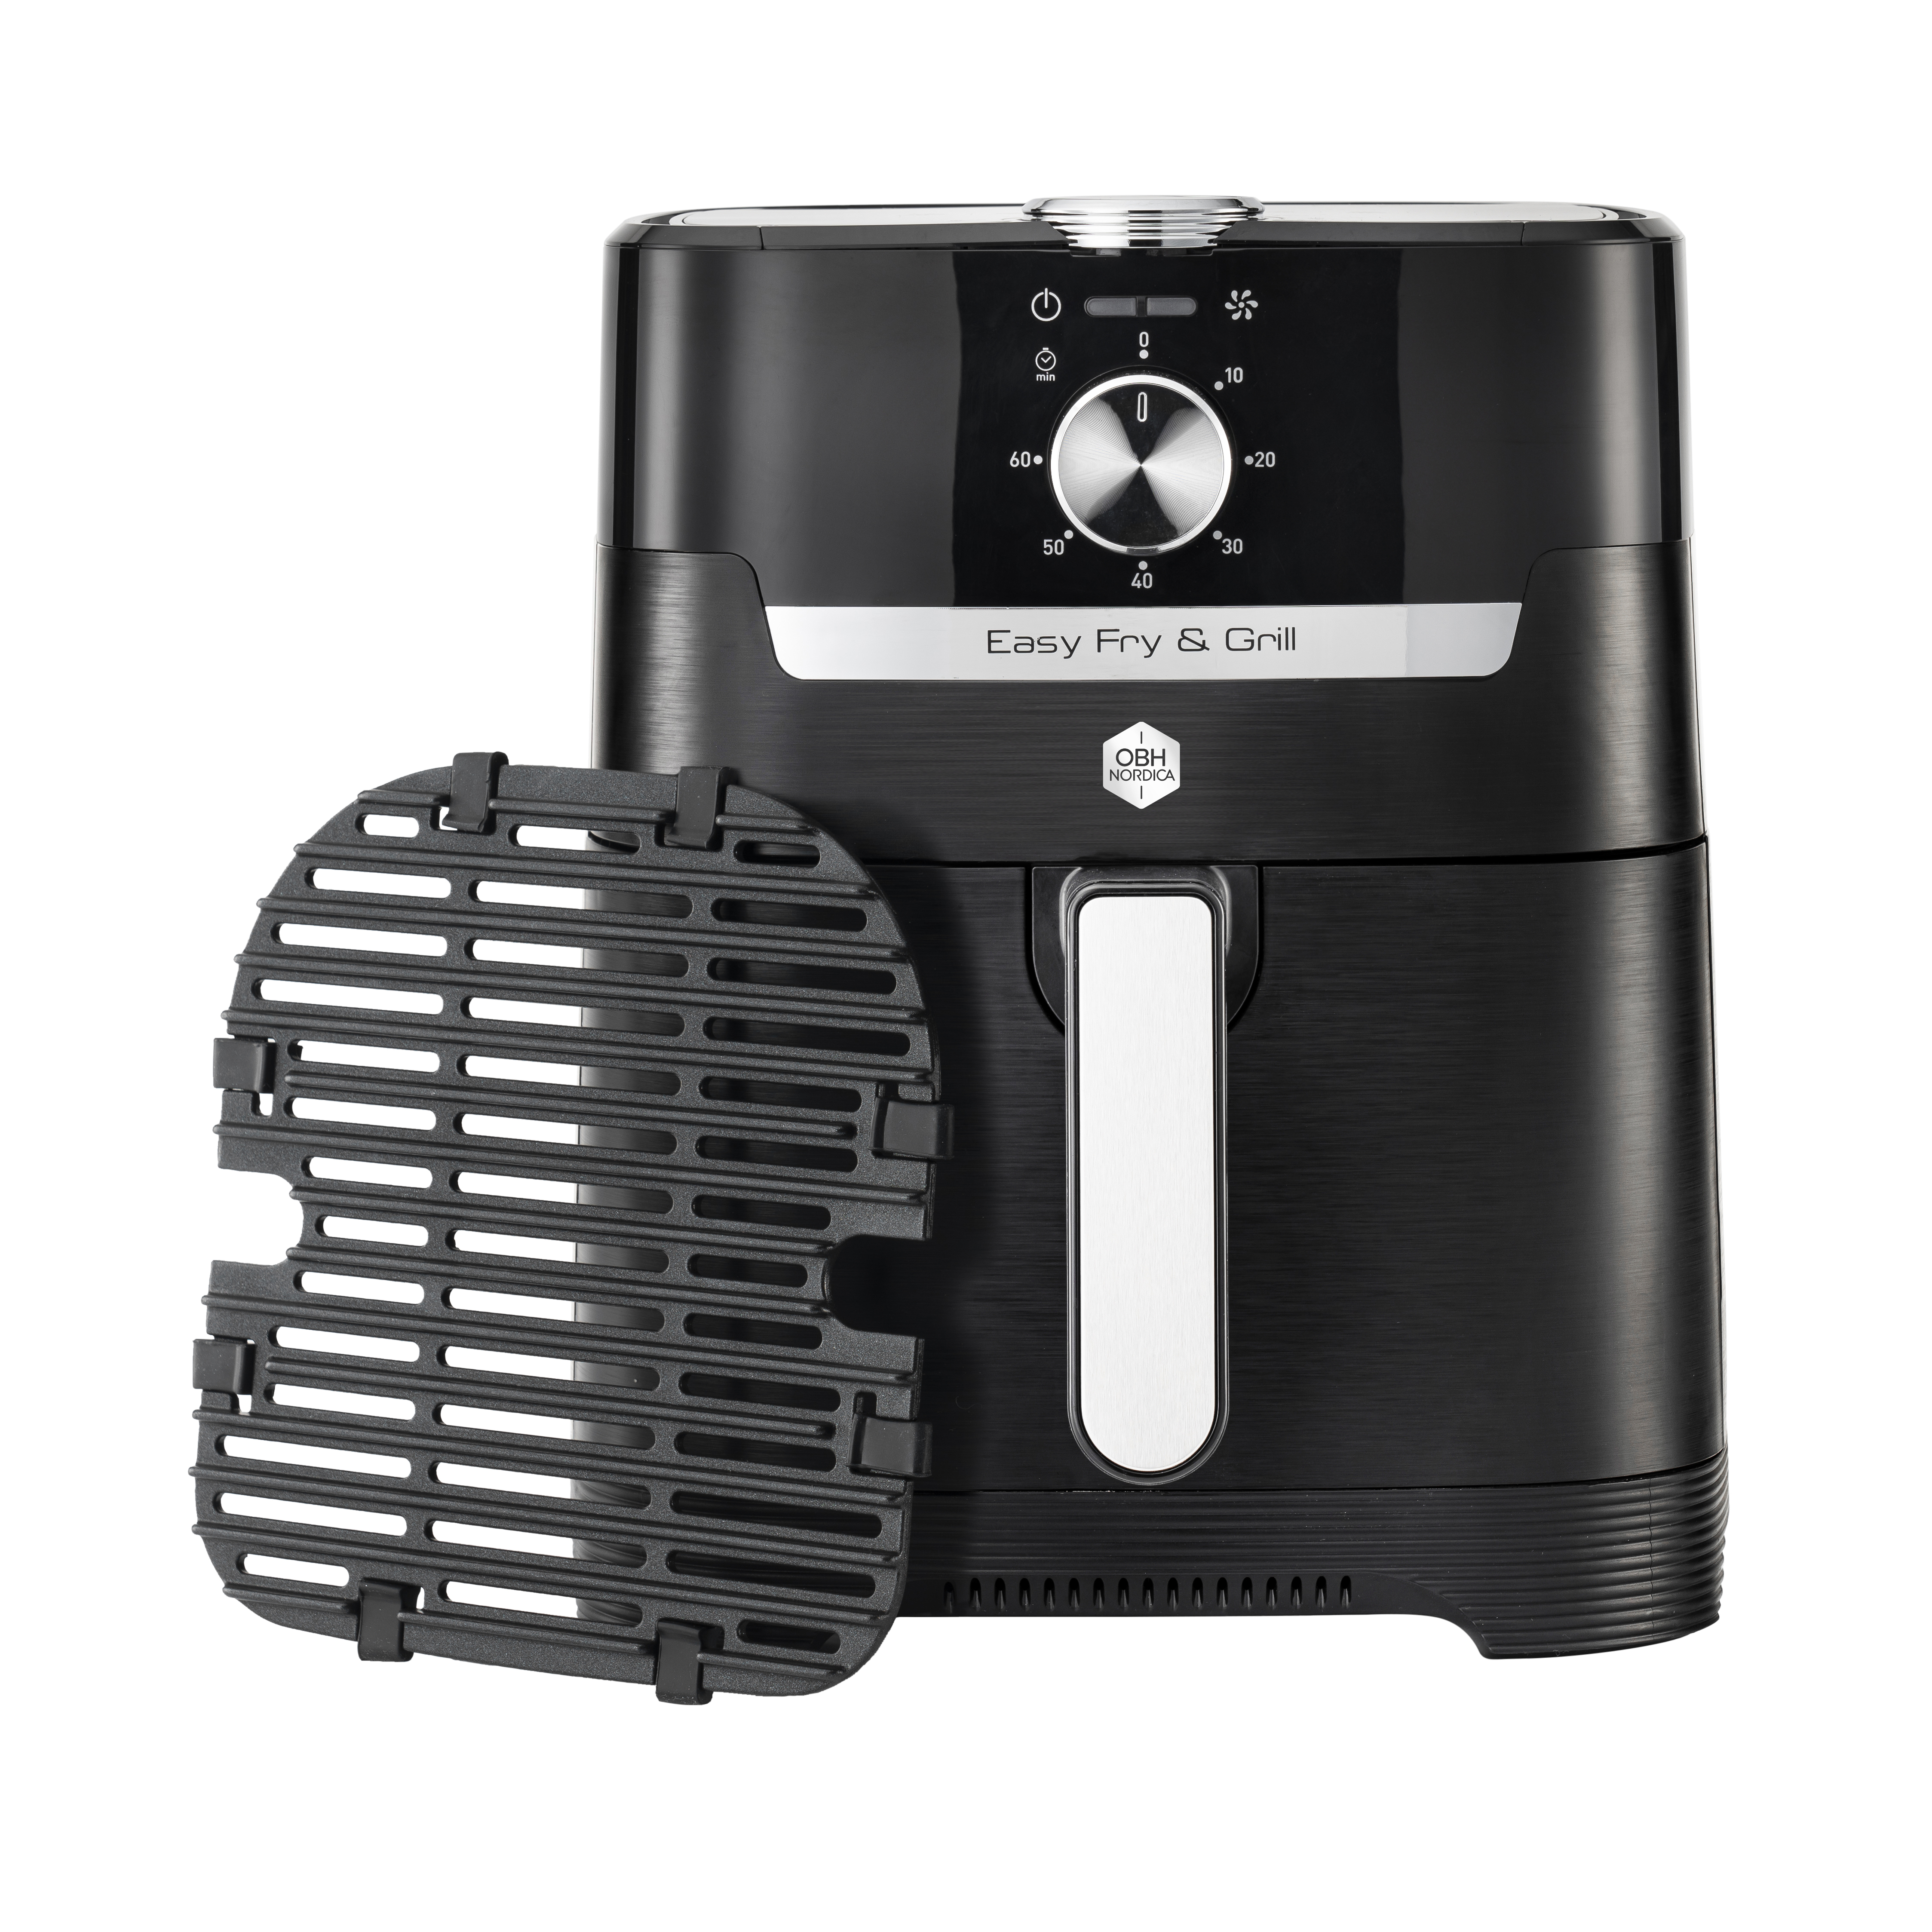 OBH- Easy Fry & Grill Classic 2in1 Black Mechanical 1550 W